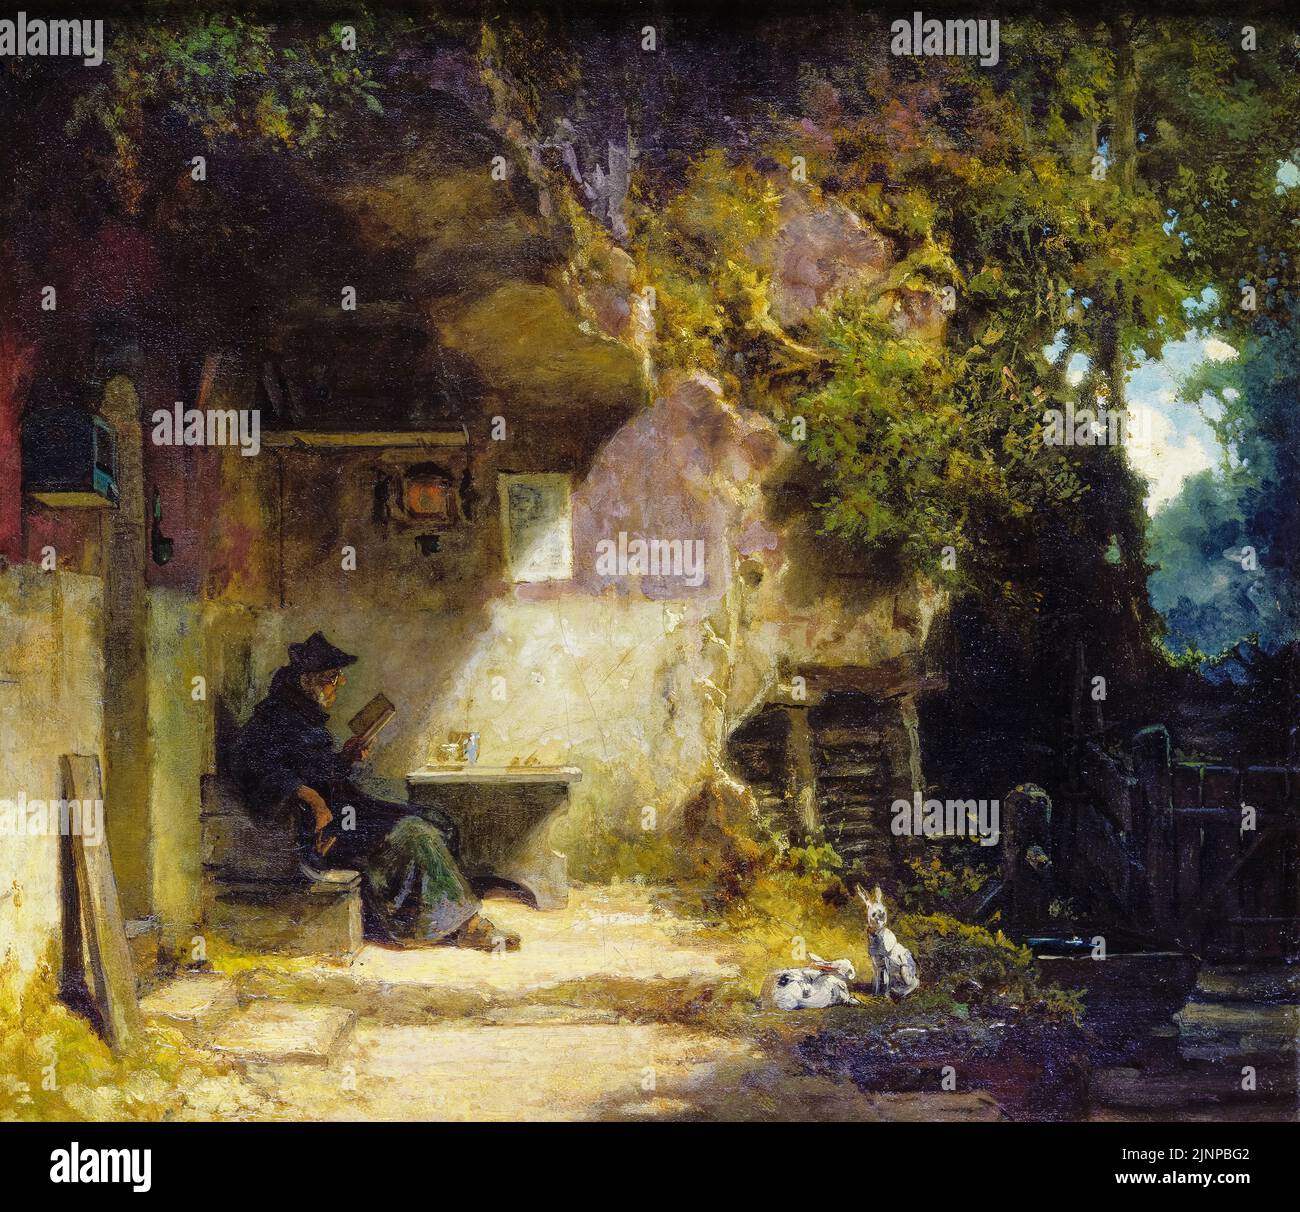 Carl Spitzweg, The Hermit in front of His Retreat, painting in oil on canvas, 1844 Stock Photo